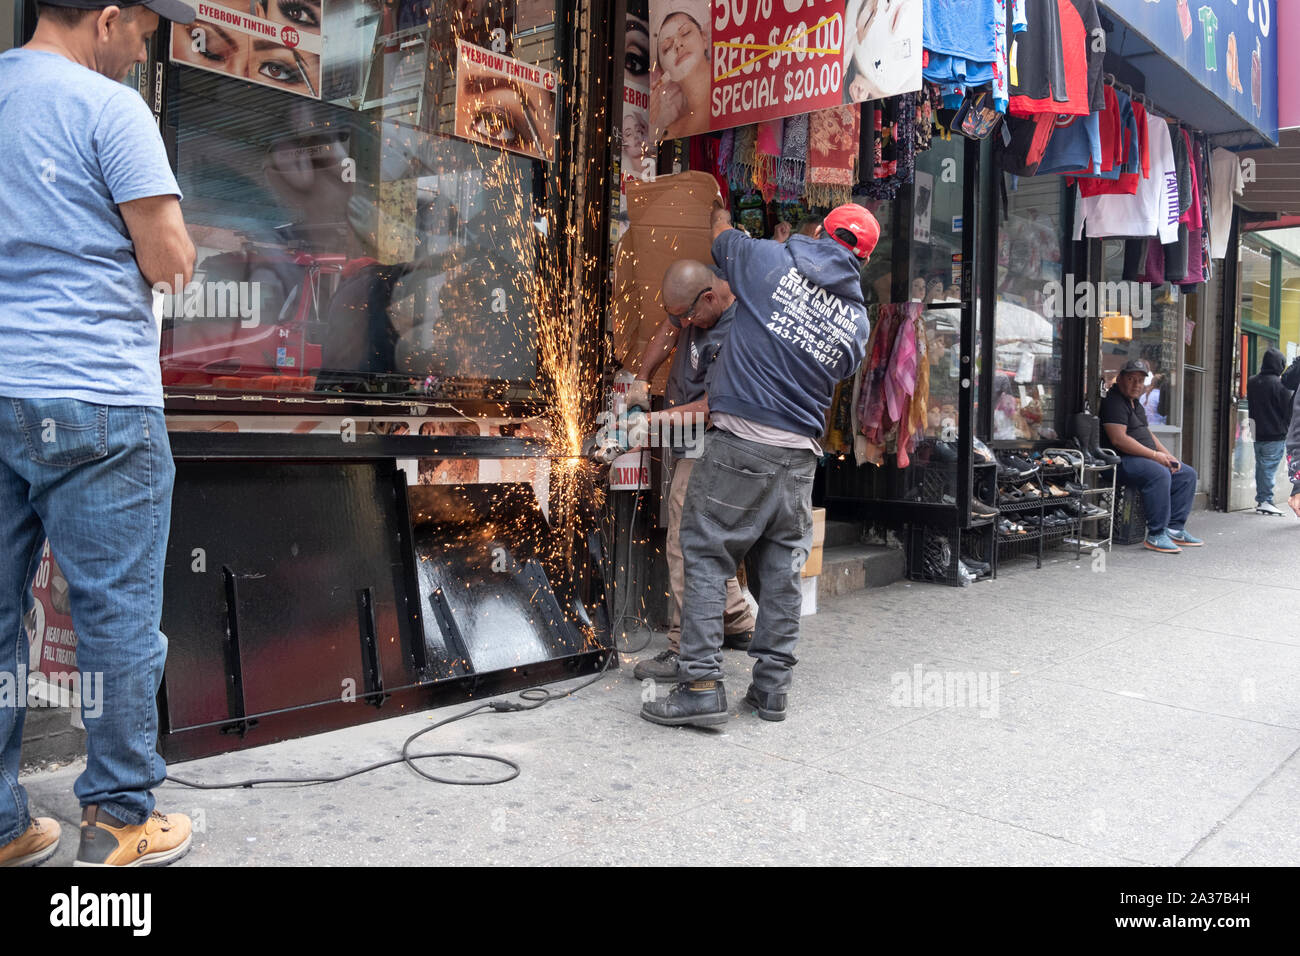 A structural iron & steel worker works on a storefront door while a colleague shields the adjacent store from sparks. In Jackson Heights, Queens, NYC. Stock Photo